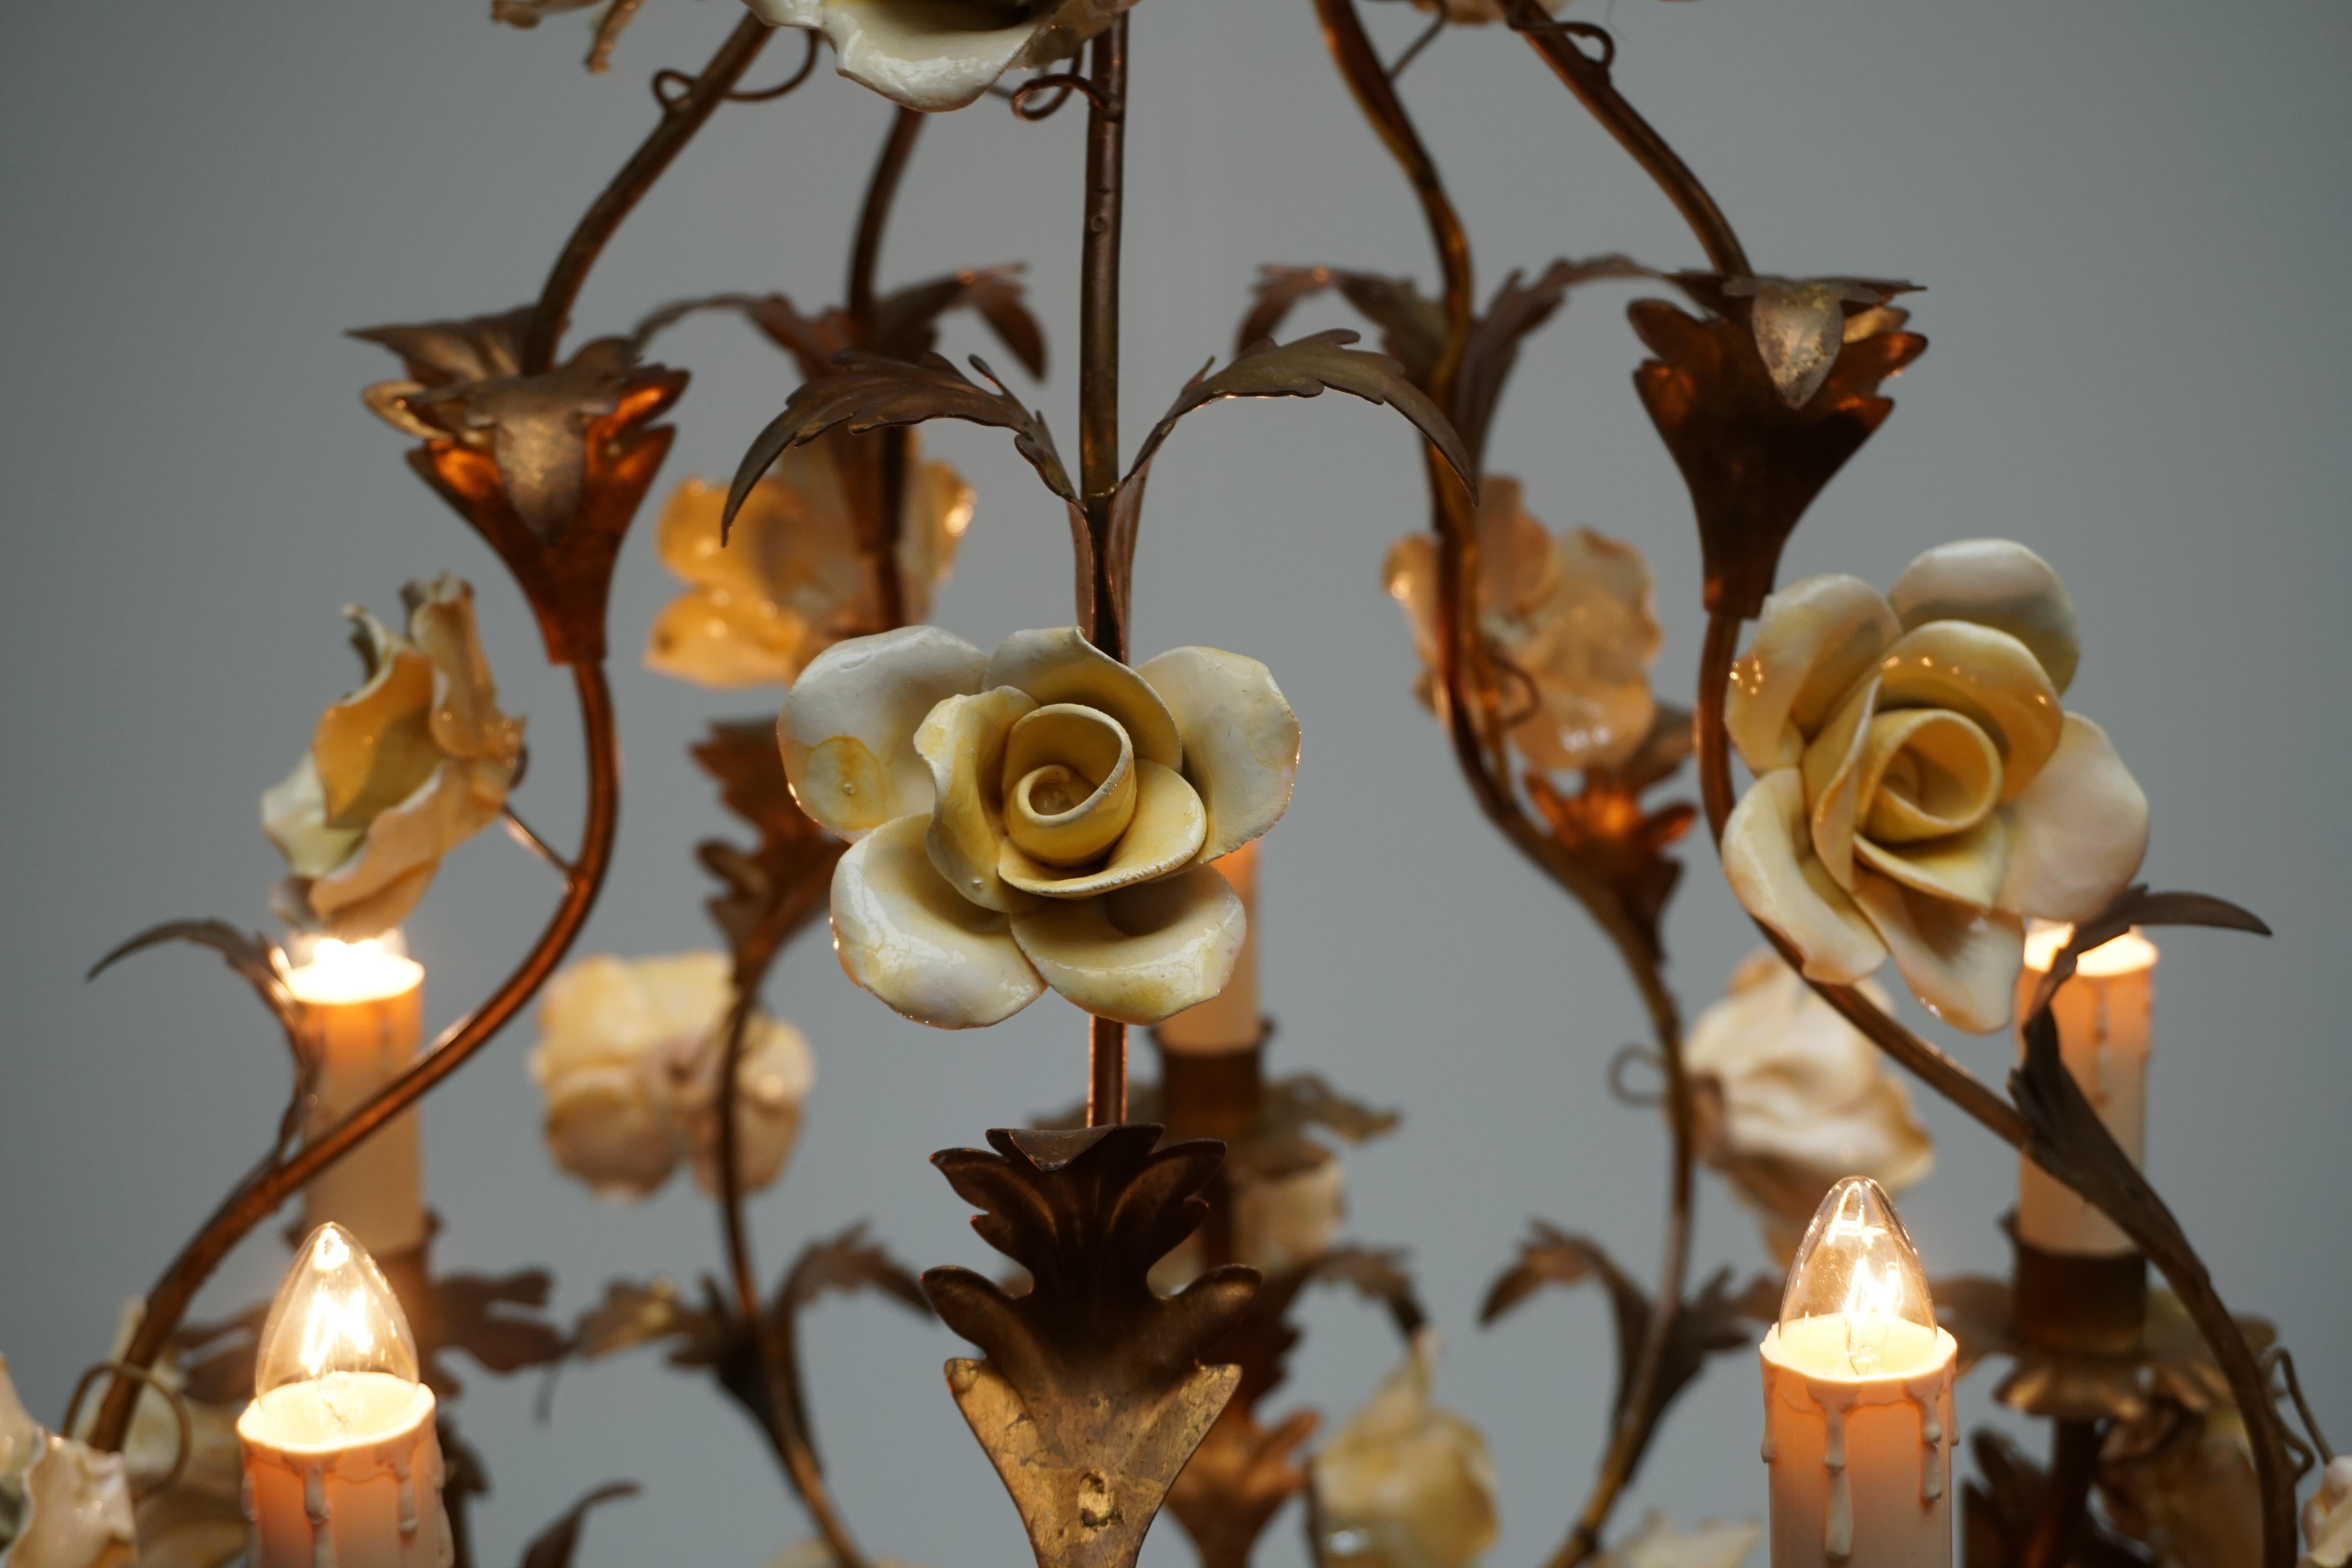 Italian Brass Tole Chandelier with Yellow Porcelain Flowers For Sale 3